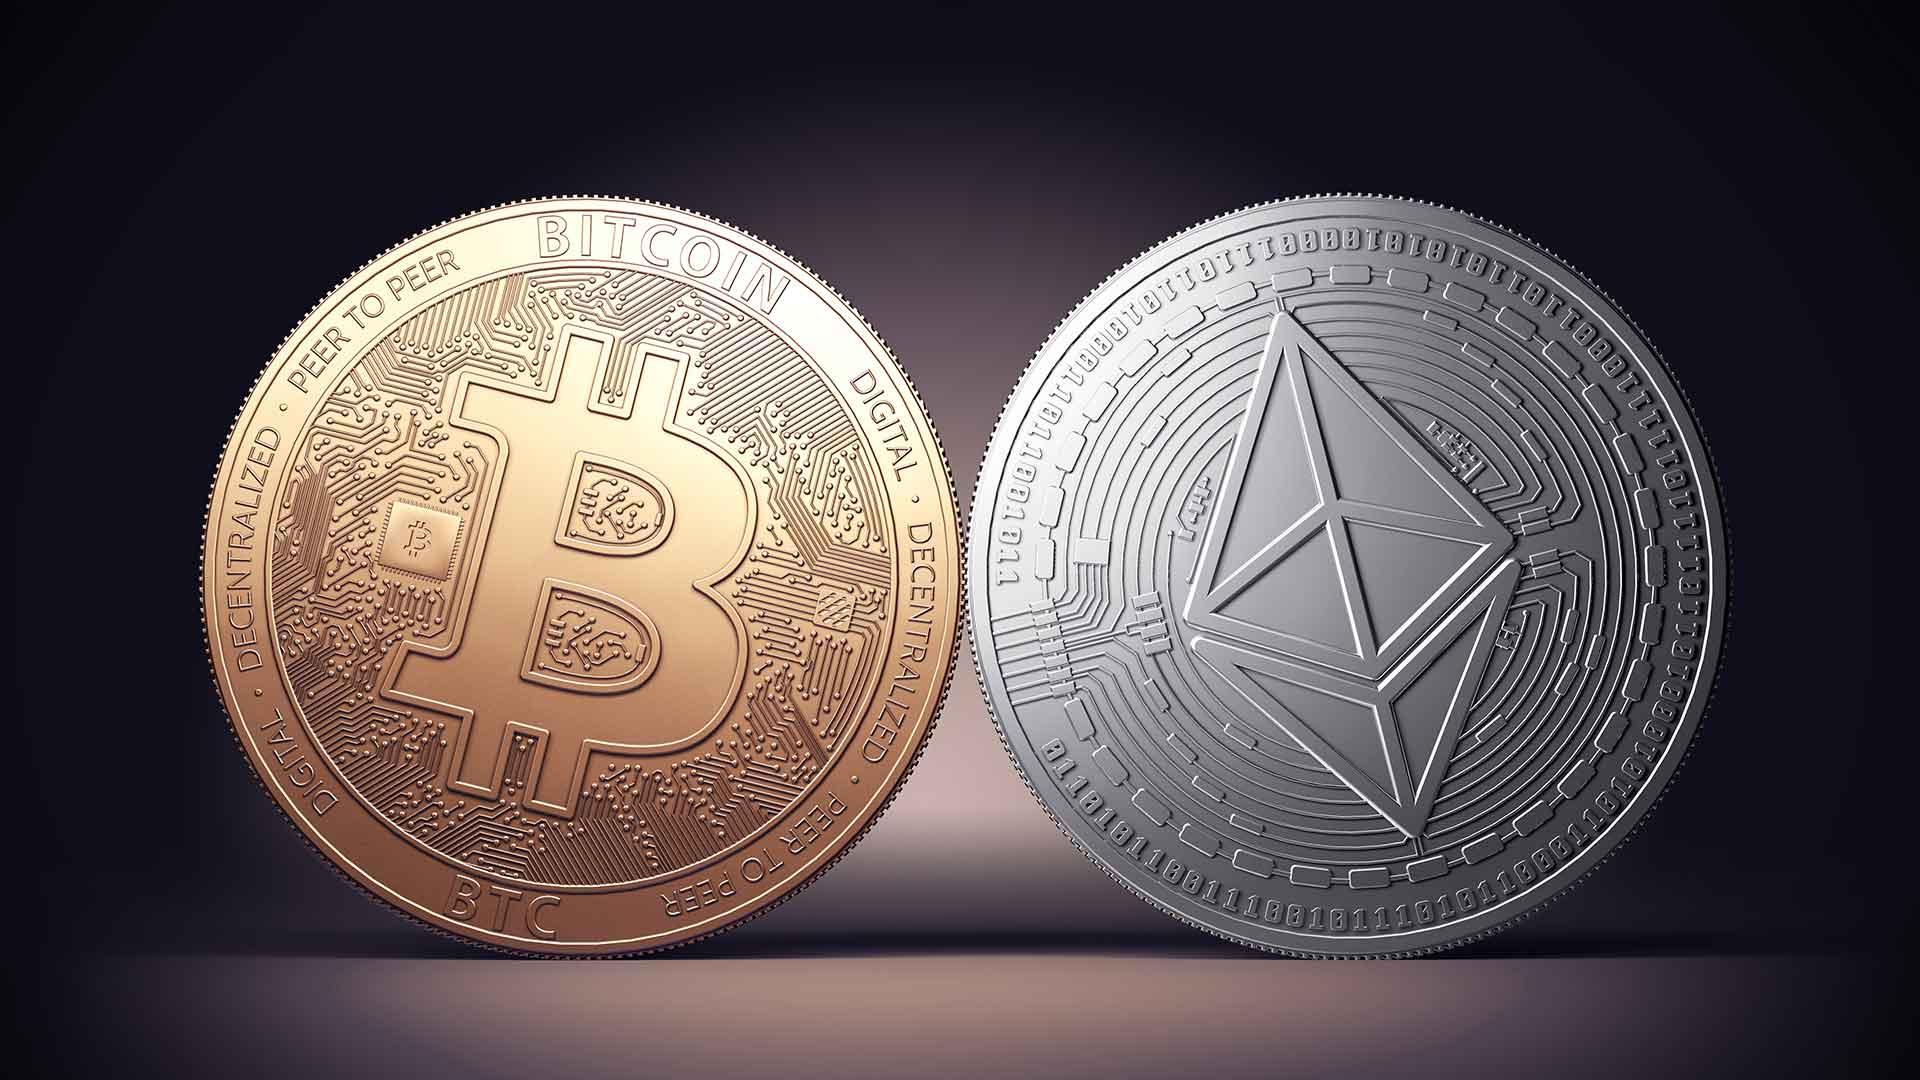 Ethereum is a 'Better' Value Store than Bitcoin: Academic Research Claims